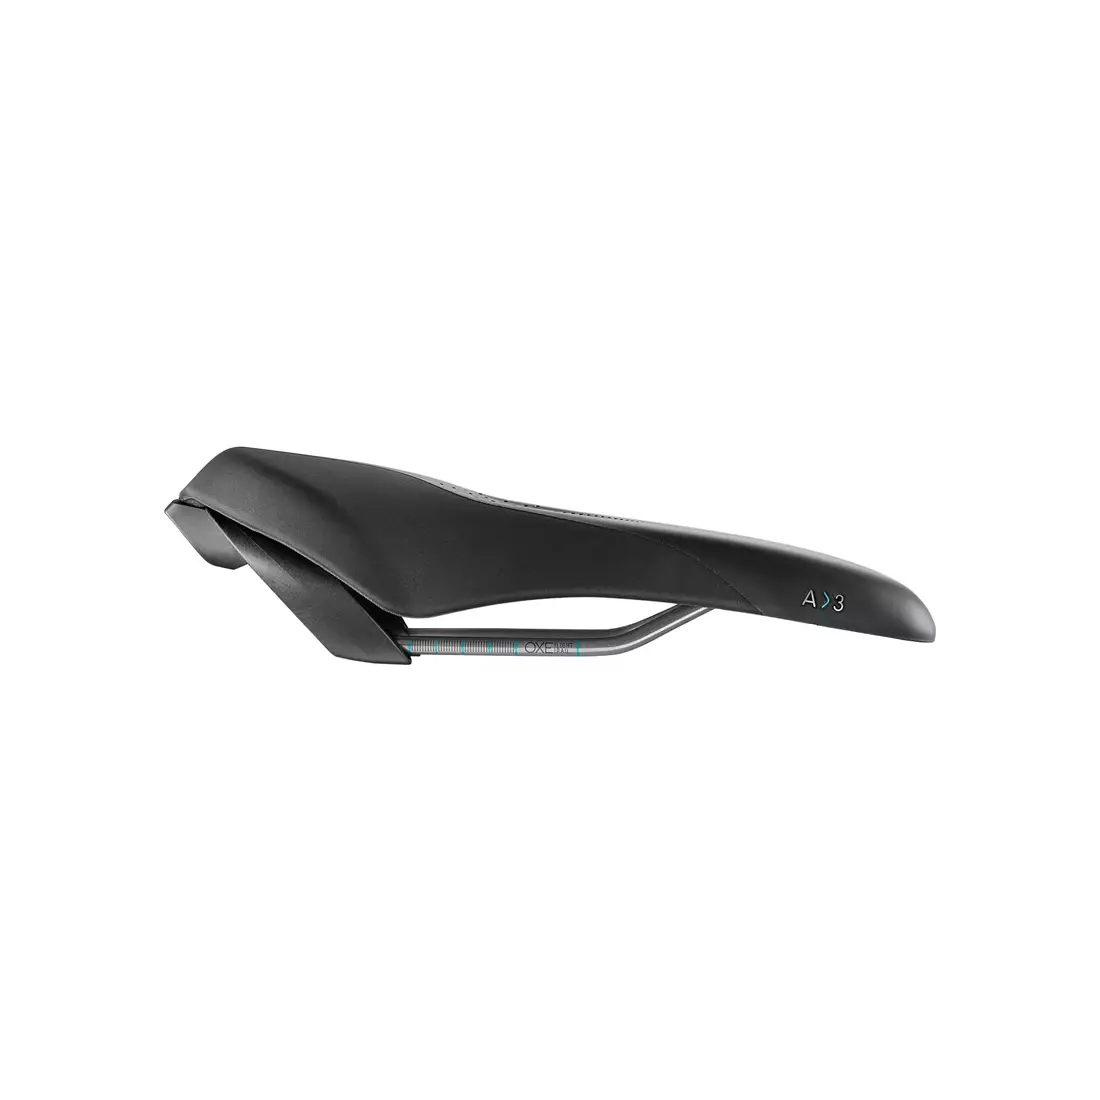 Bicycle saddle SELLEROYAL SCIENTIA ATHLETIC A3 LARGE 45st. gel + elastomers unisex SR-54A0LB0A09210